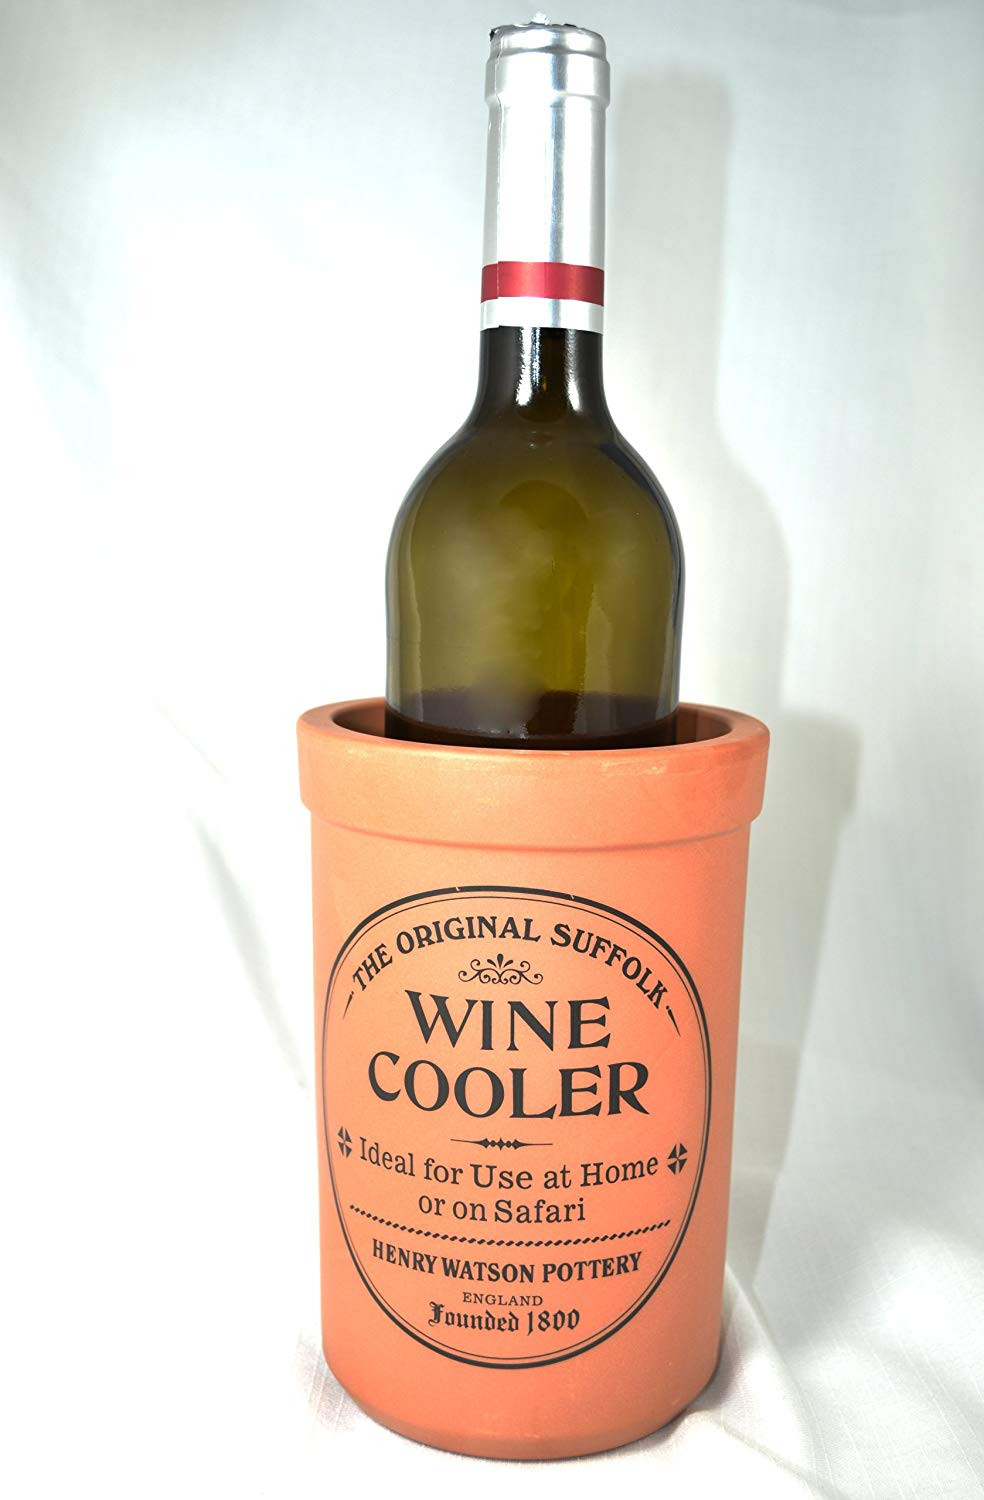 wine bottle wall vase of amazon com original suffolk collection wine cooler wine chillers for amazon com original suffolk collection wine cooler wine chillers kitchen dining